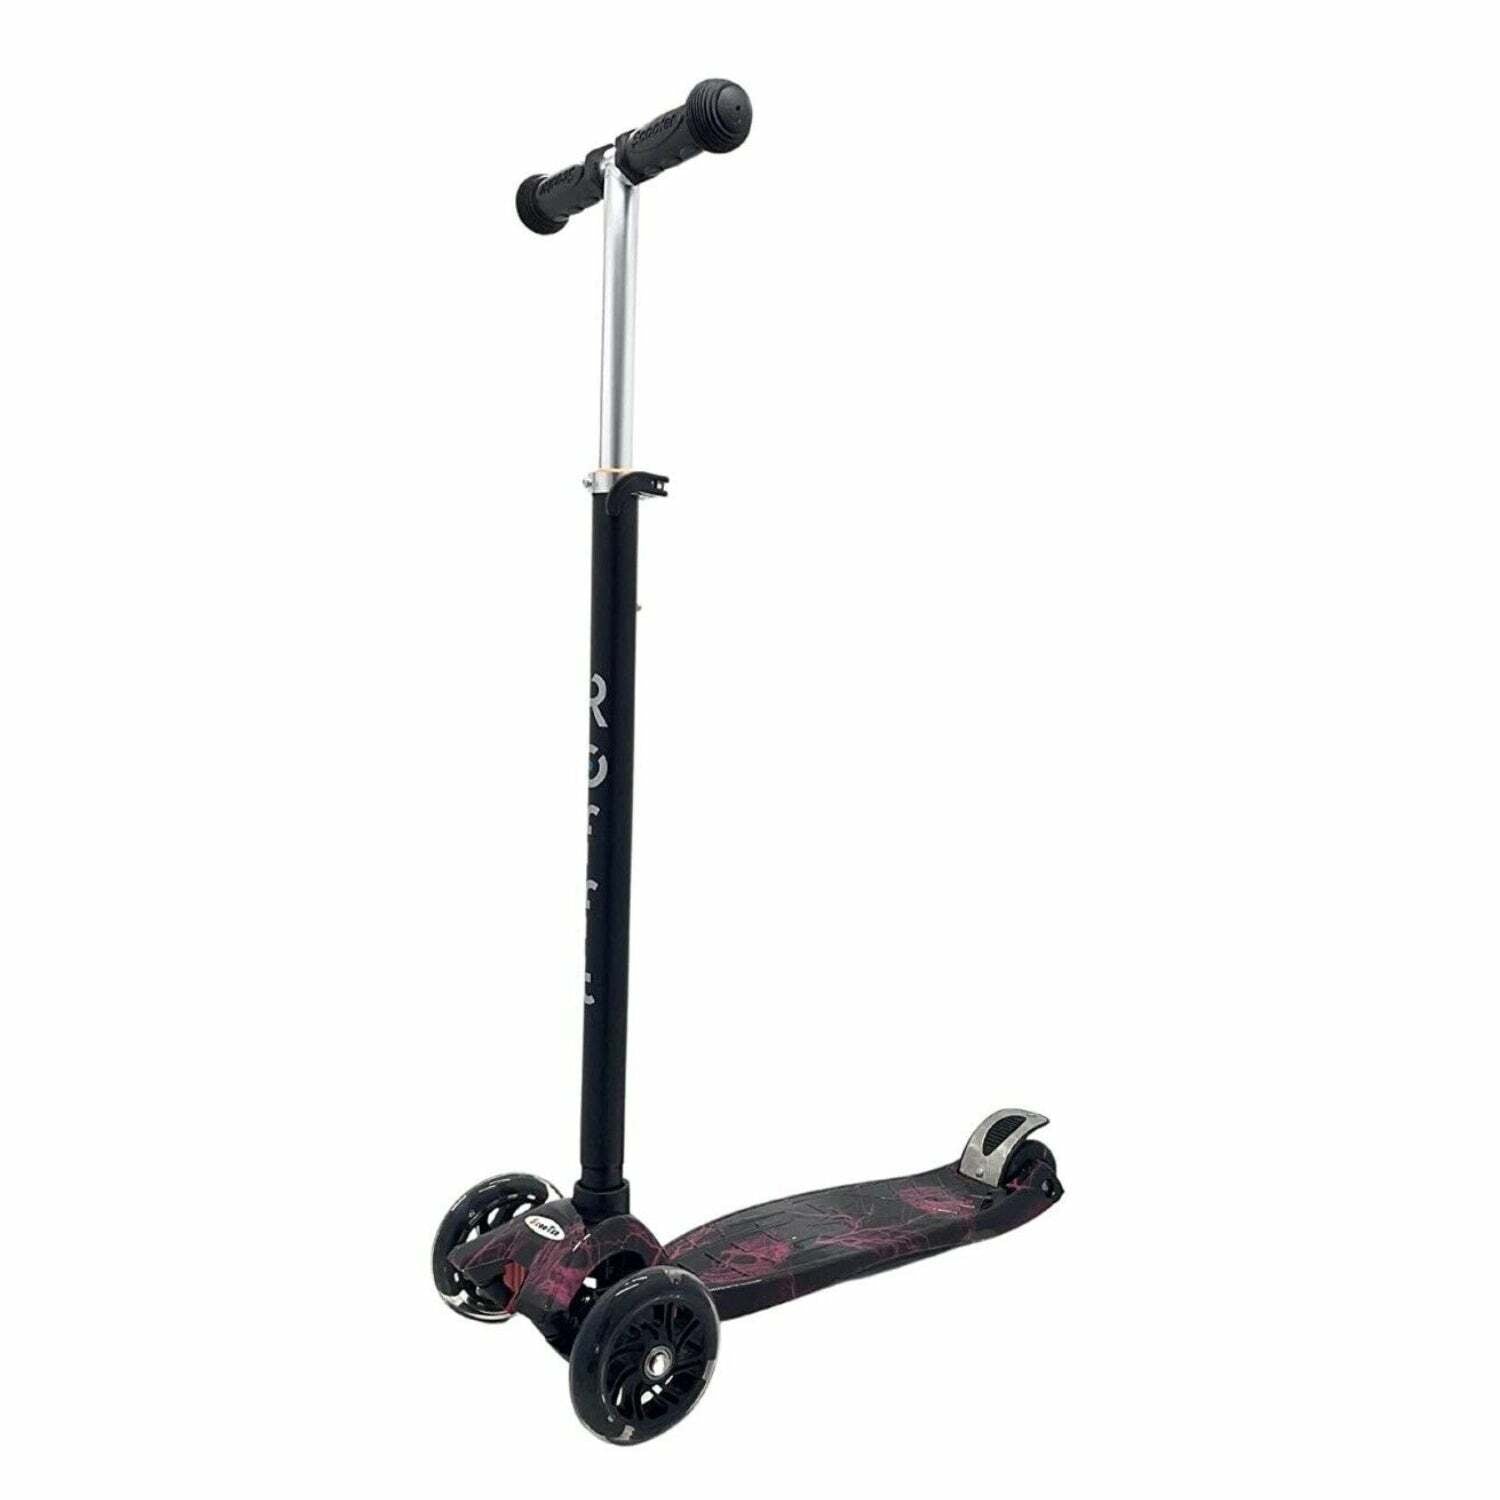 ROFFT - Kick Scooter Maxi, 3 Wheel, Lean-to-Steer, LED, Kids Ages 6-12 Graffiti Black